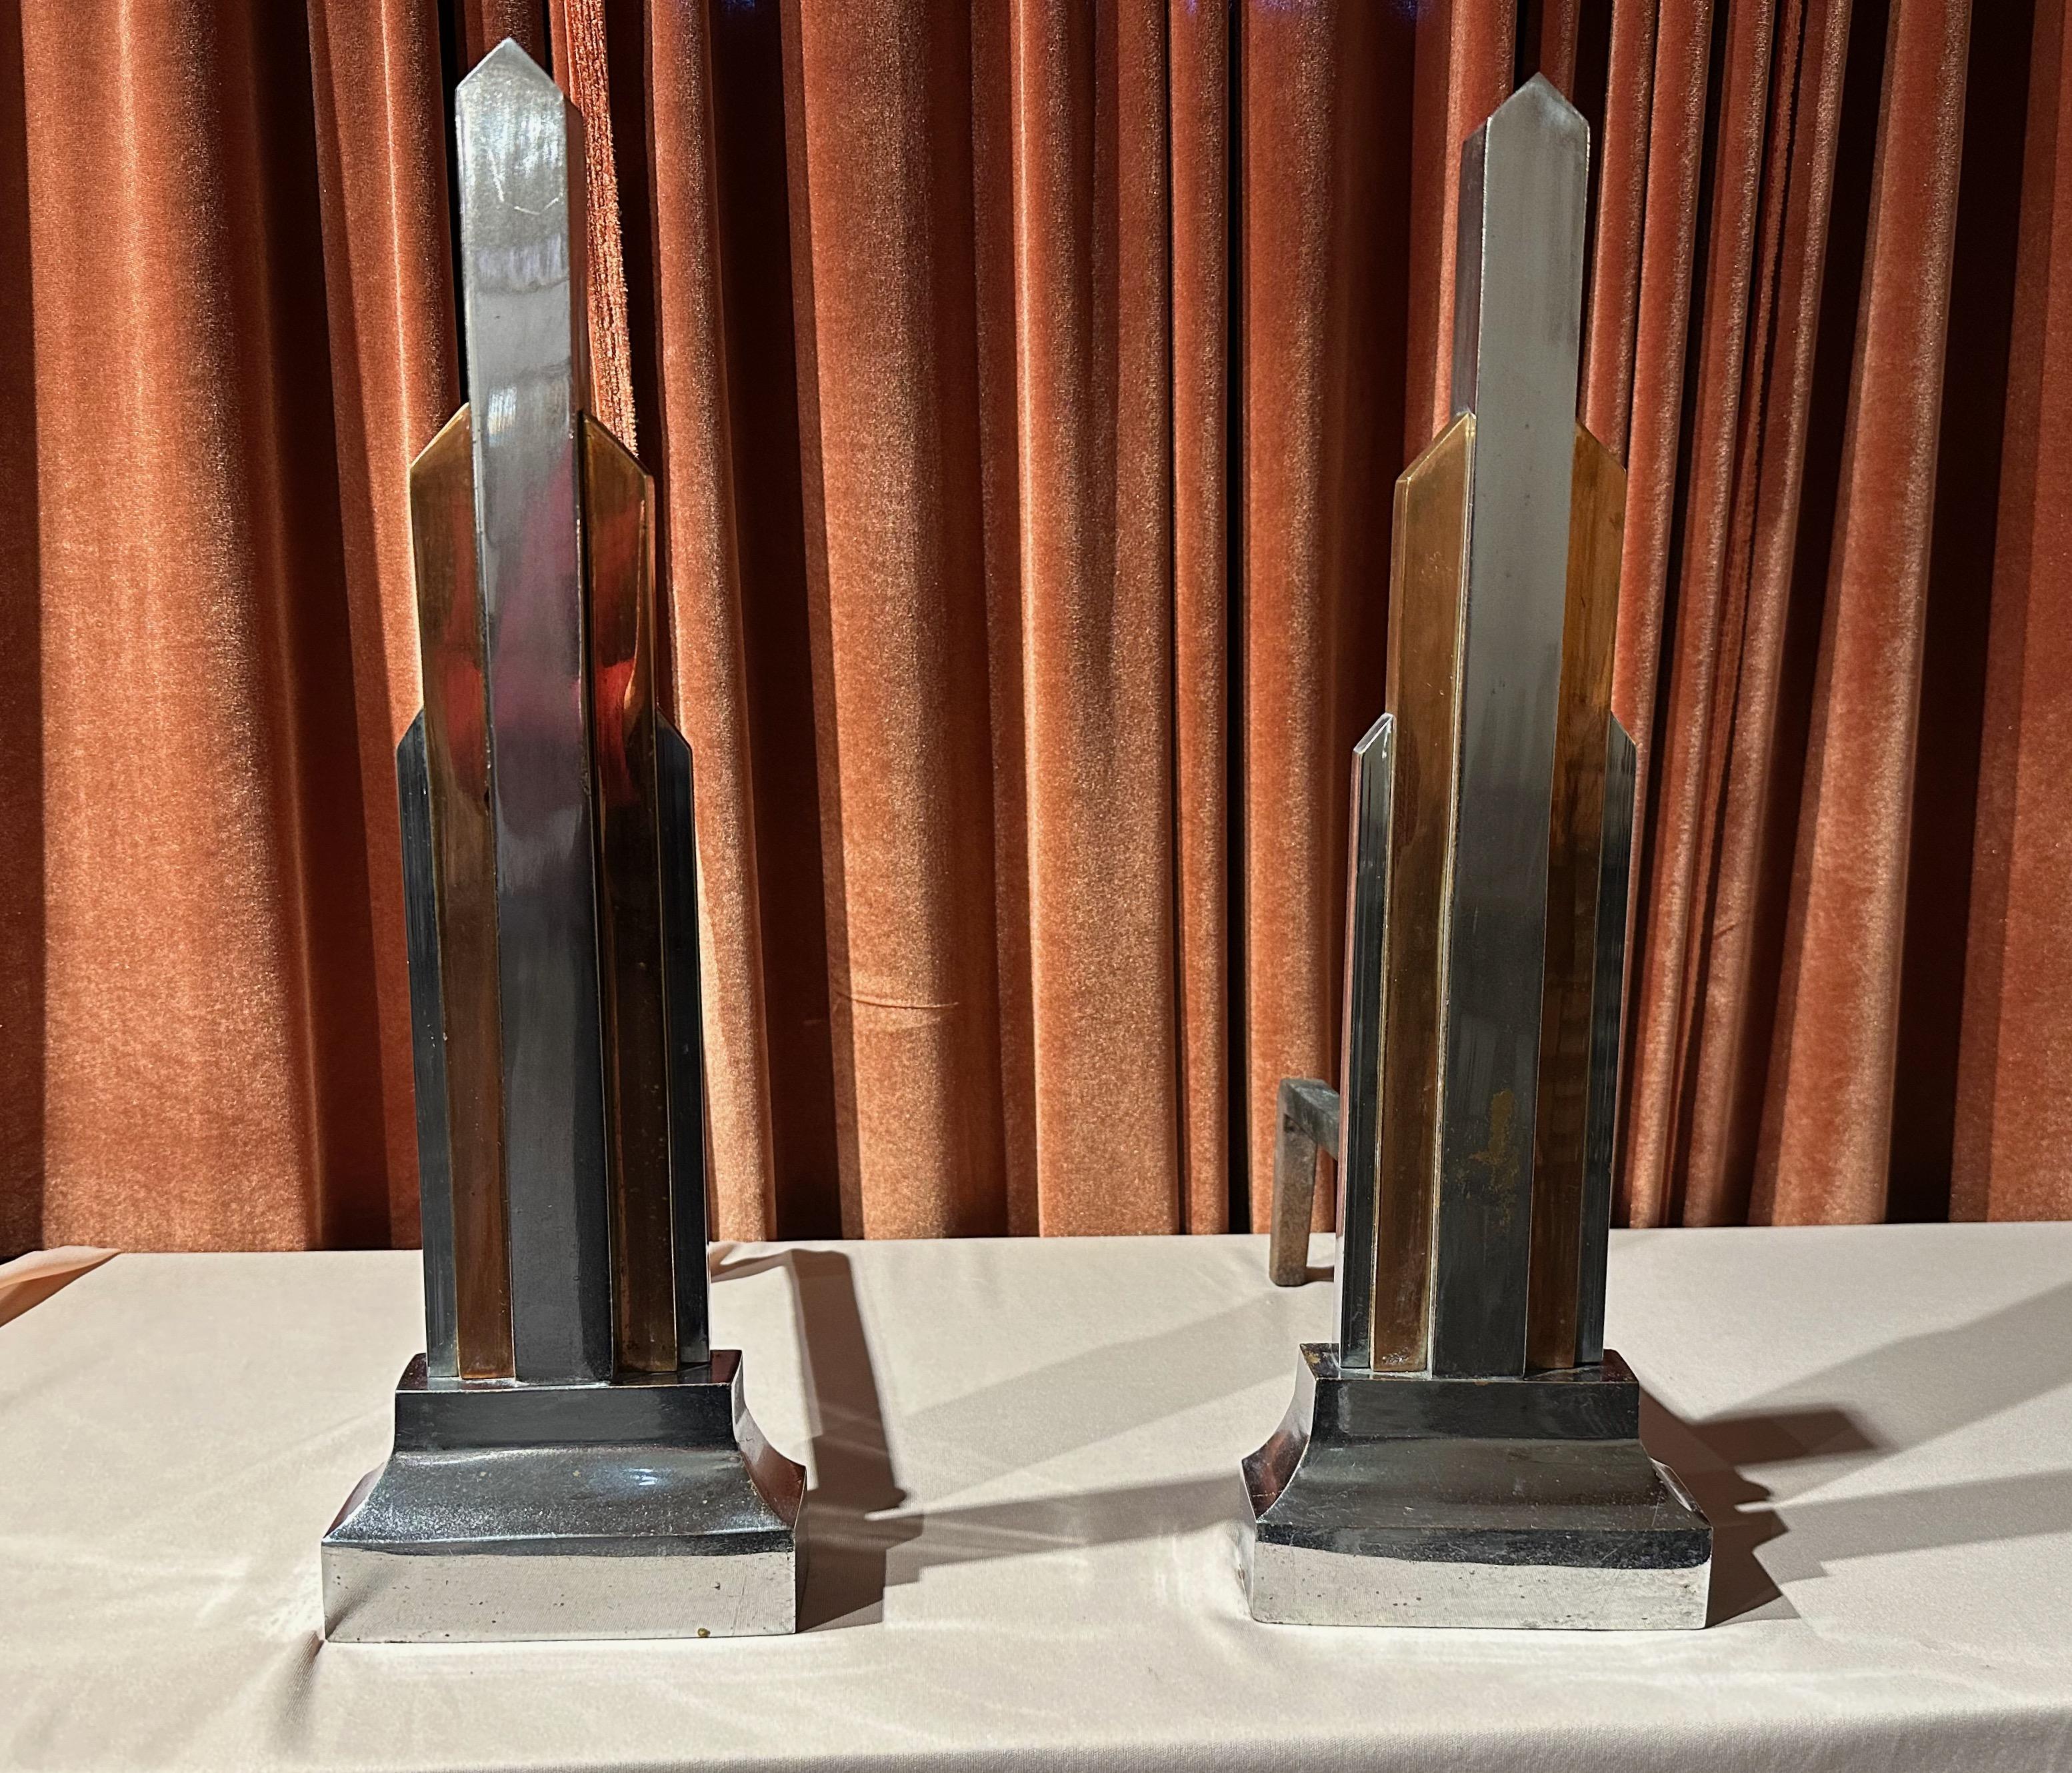 An Art Deco Pair of “Skyscraper” Andirons designed by Donald Deskey, famed designer of Radio City Music Hall as well as hundreds of furnishings,household decorative objects and graphics. These chrome and copper andirons are especially rare as most